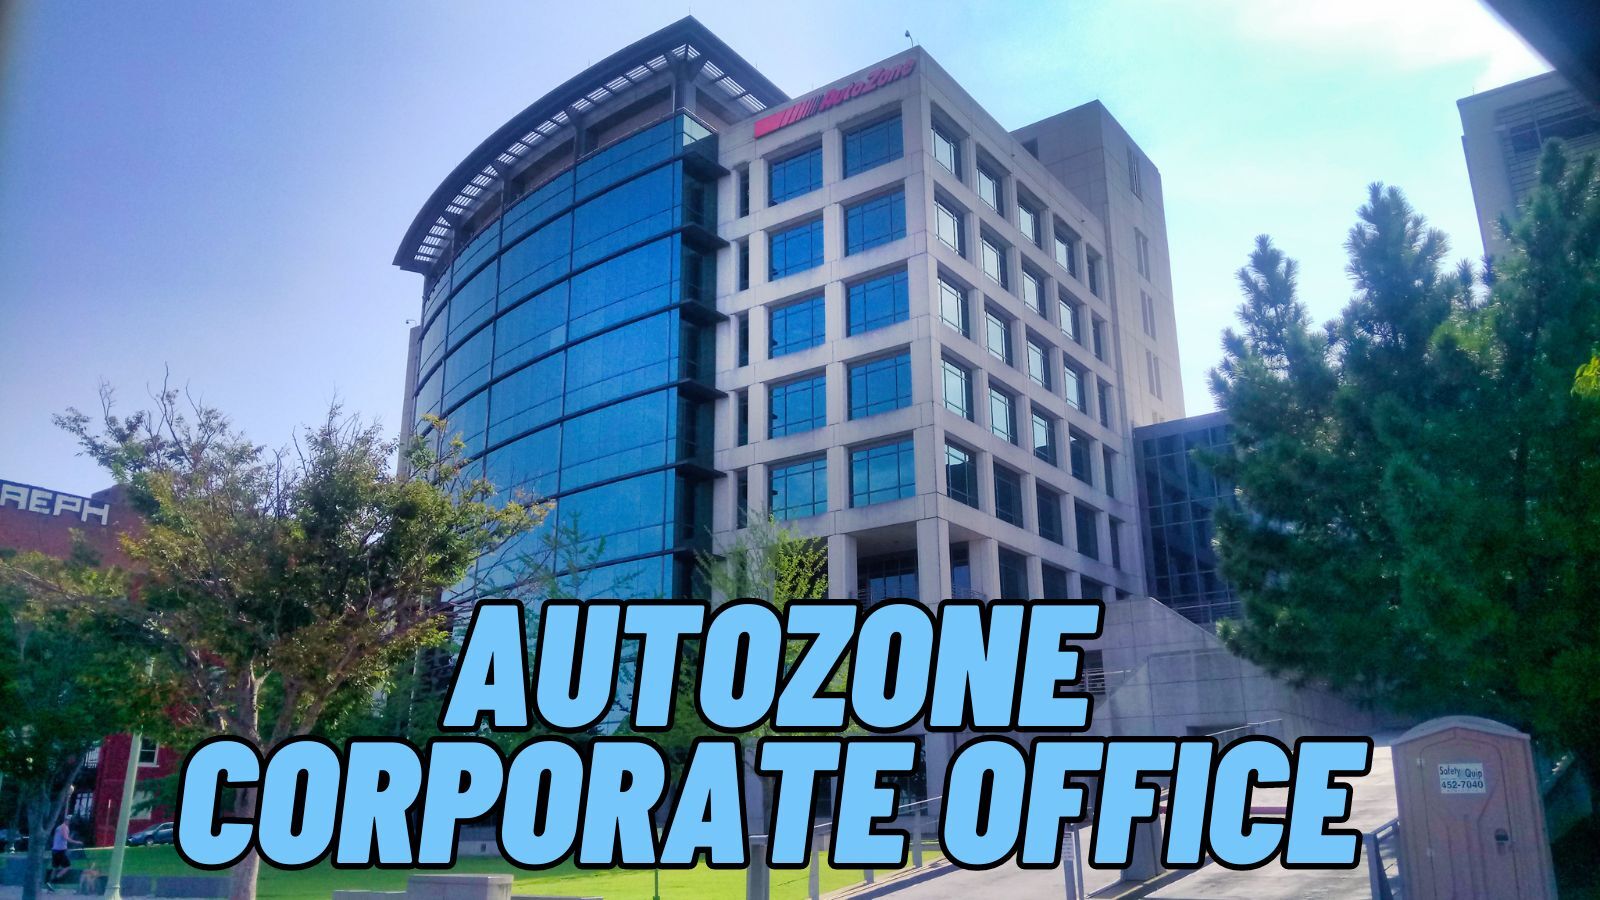 AutoZone Corporate Office (Everything You're Interested In)